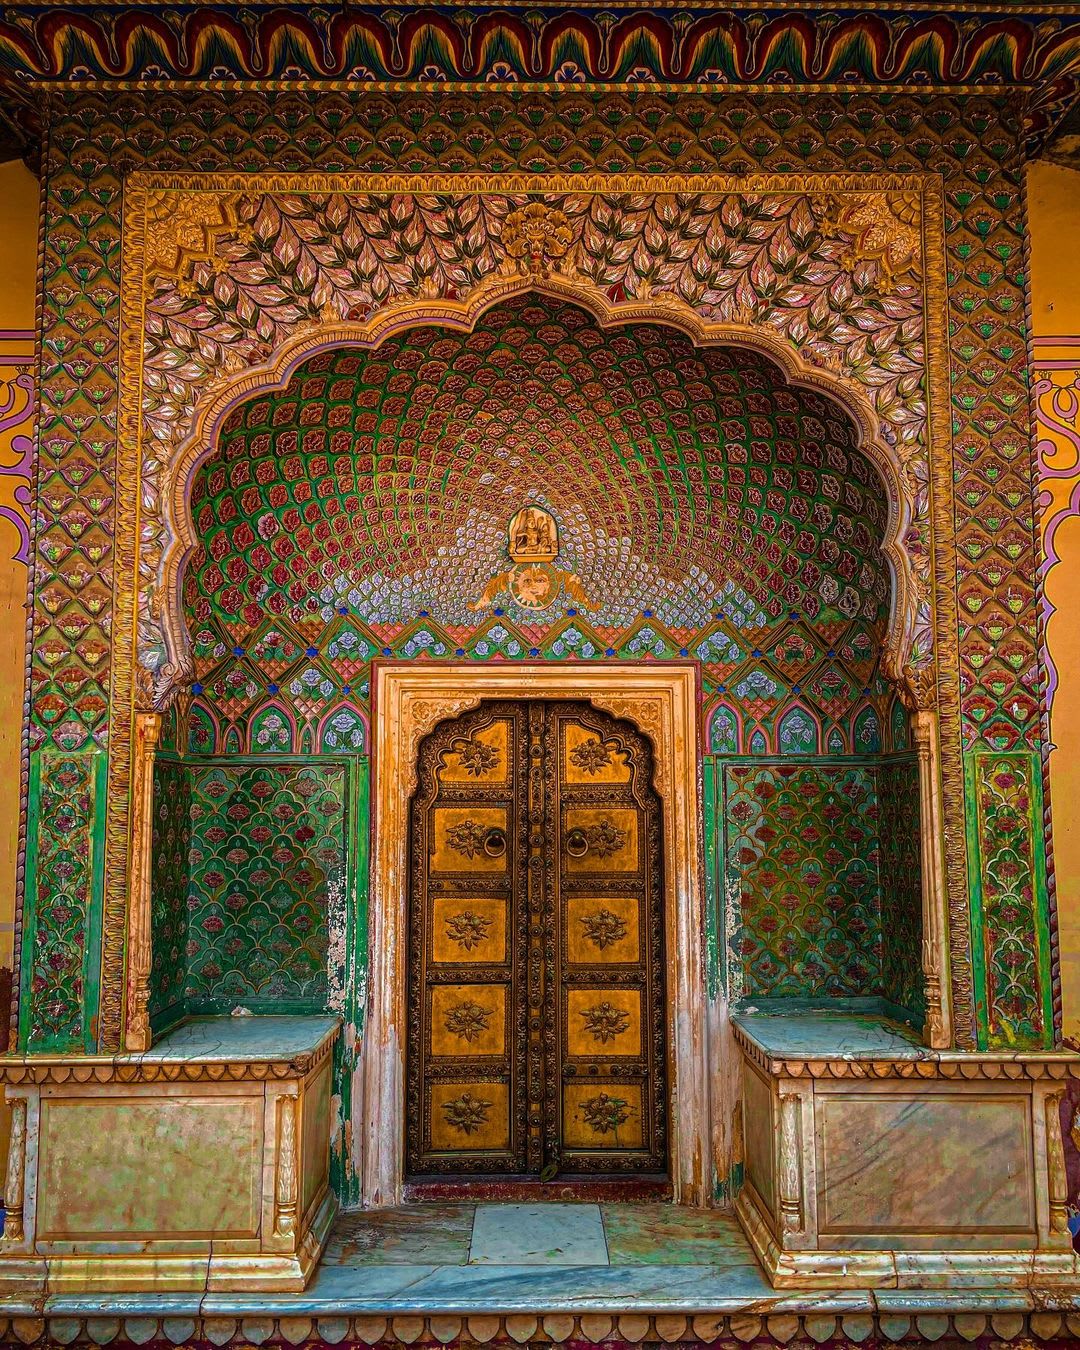 Rose Gate at City Palace in Jaipur, India shows winter season and is dedicated to goddess Devi